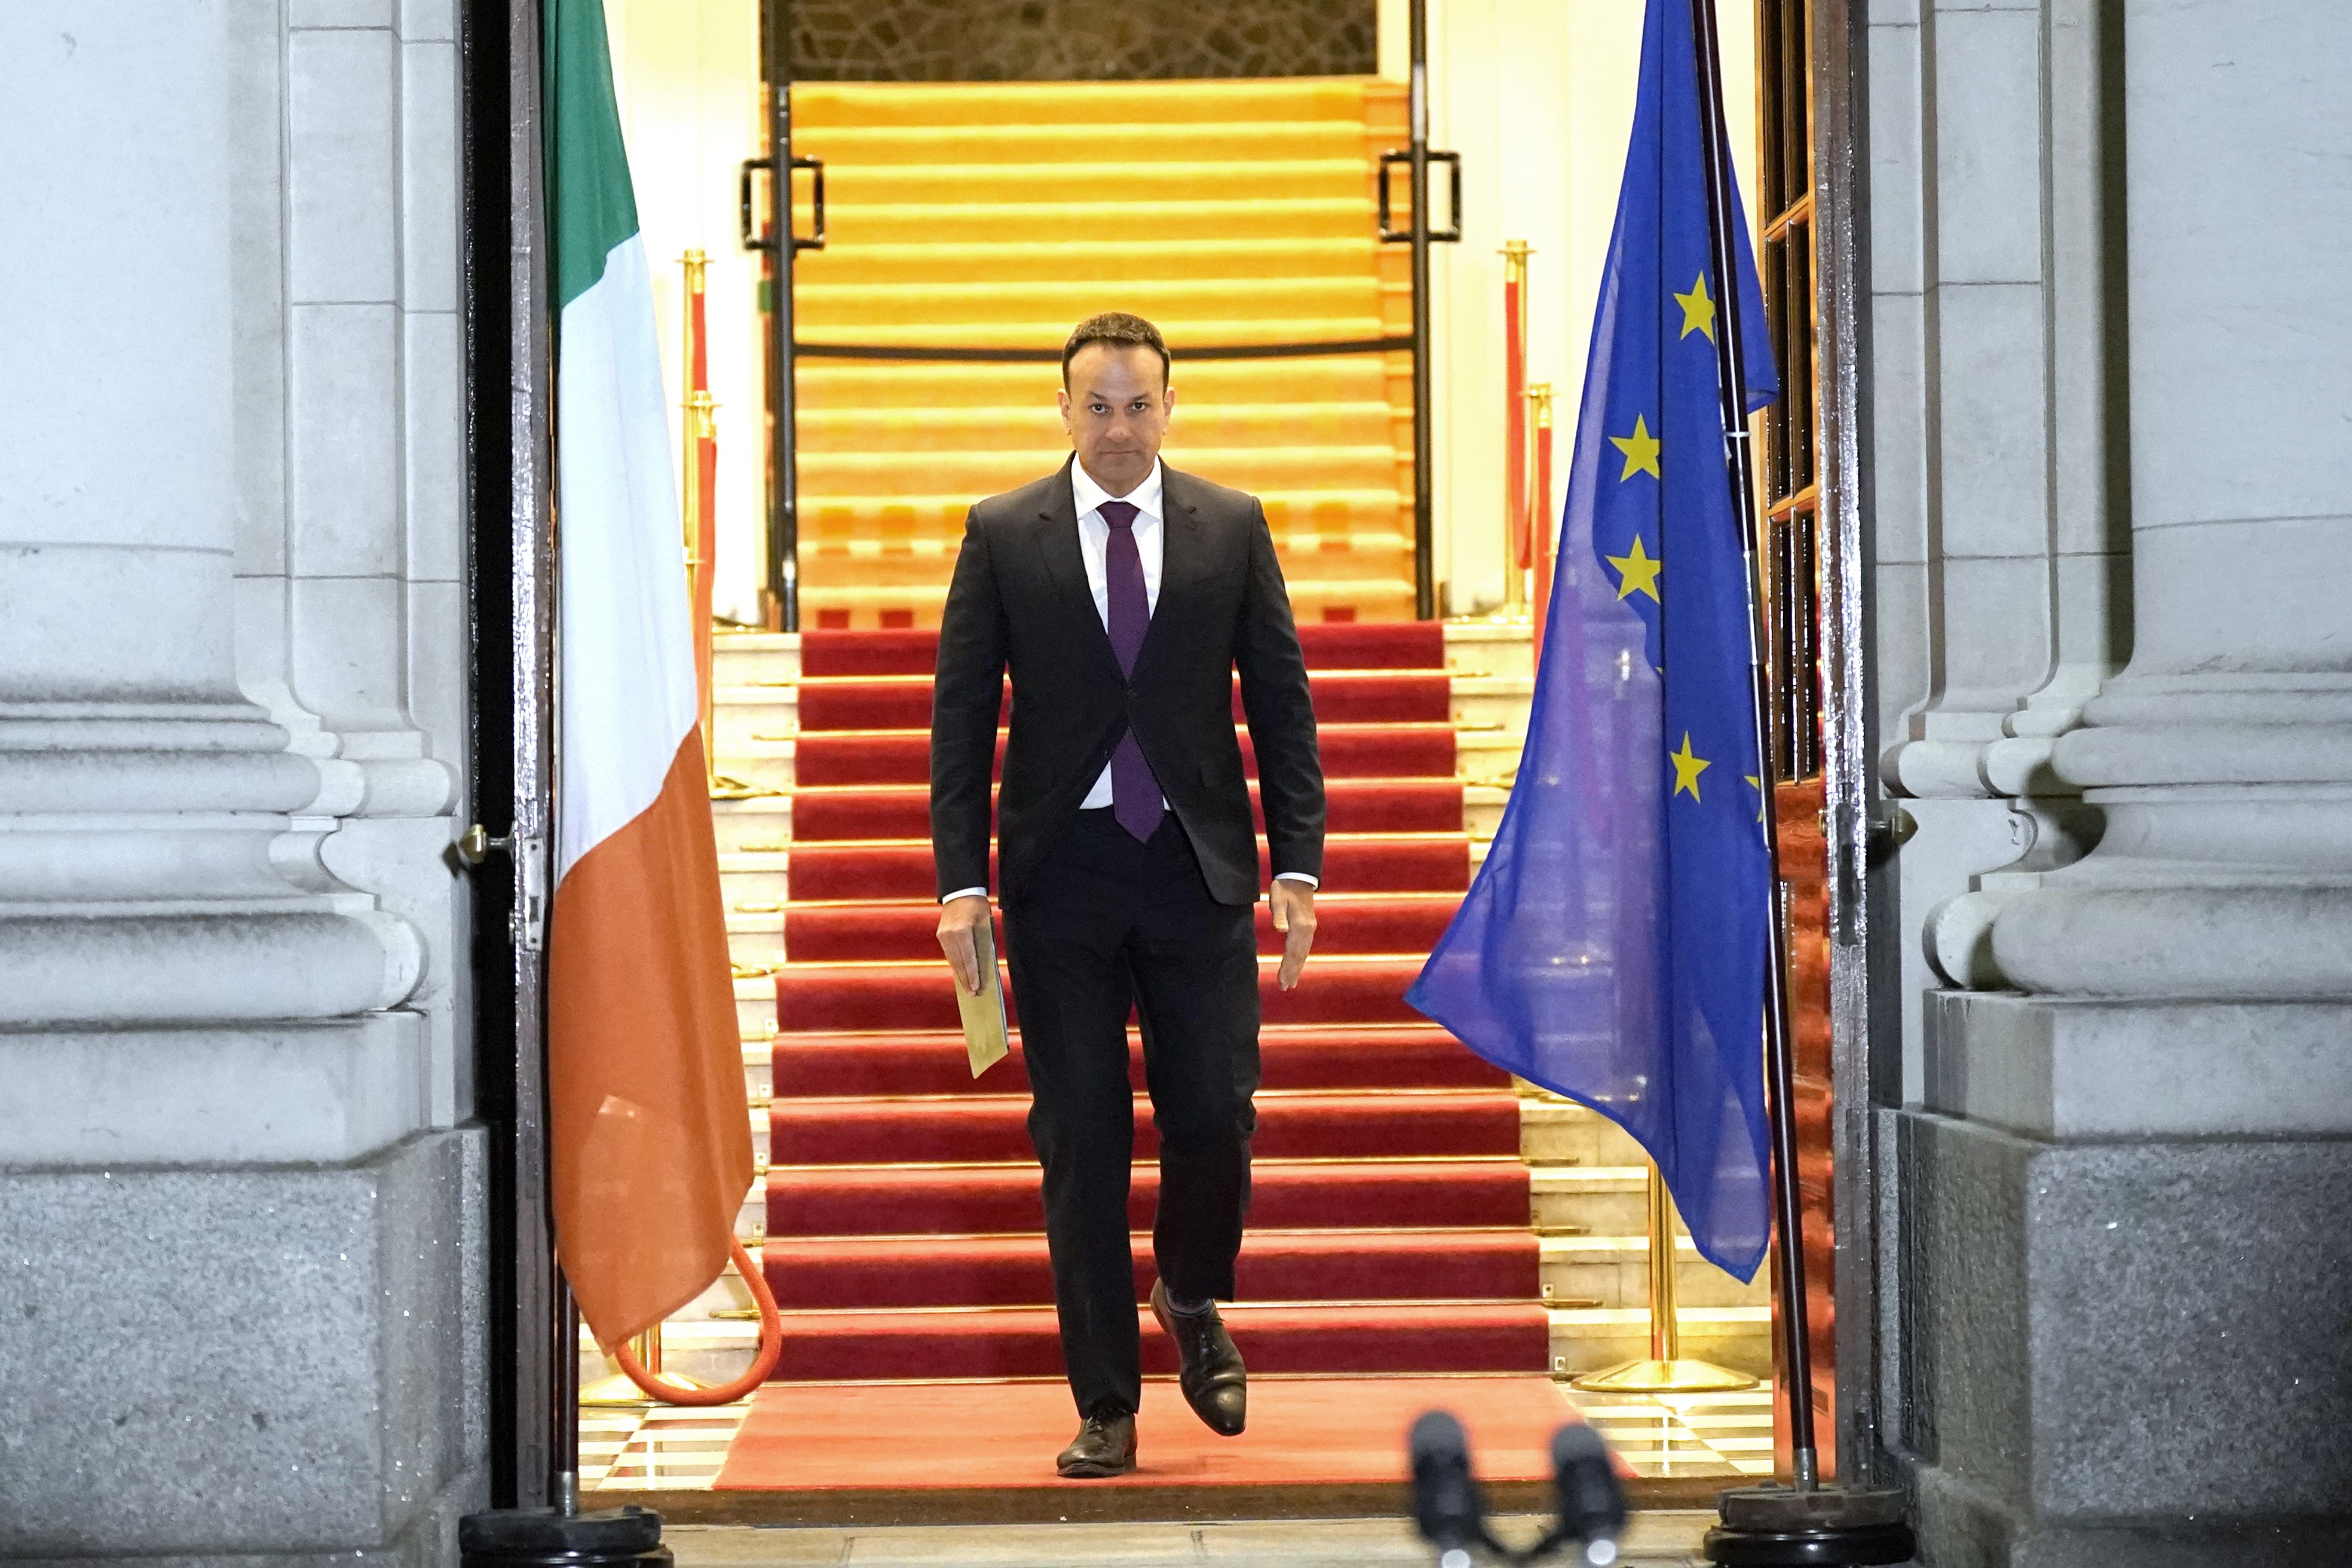 Taoiseach Leo Varadkar before speaking to the media at Government Buildings in Dublin (PA)